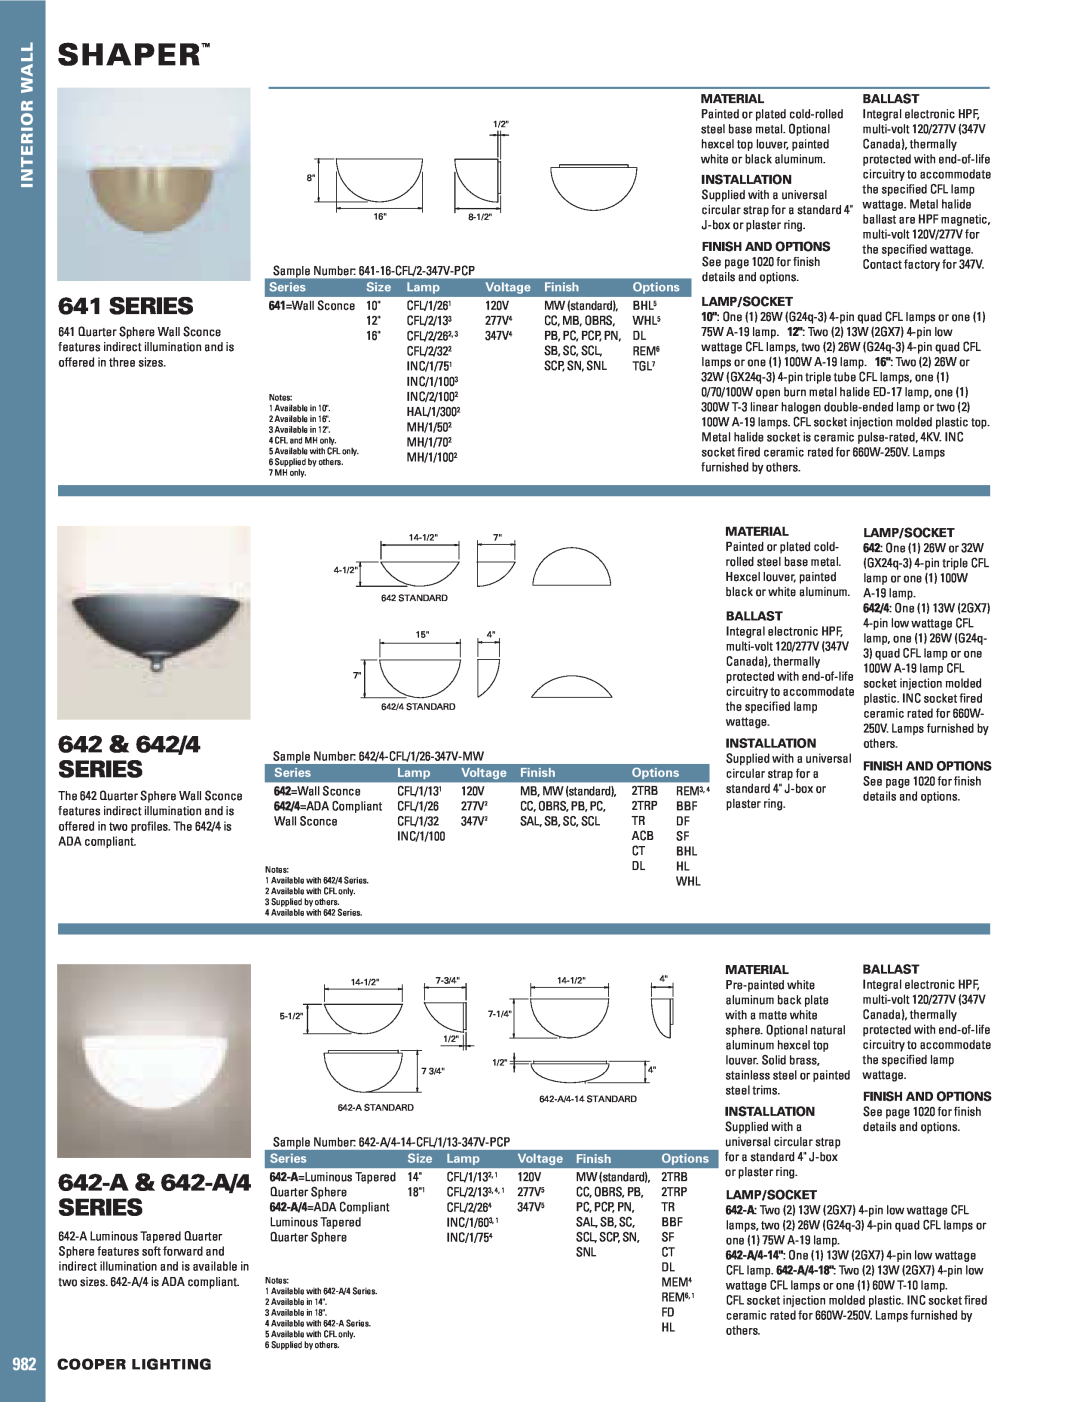 Cooper Lighting 642-A/4 SERIES manual Shaper, Series, 642 & 642/4 SERIES, 642-A& 642-A/4, Wall, Interior, Size Lamp 